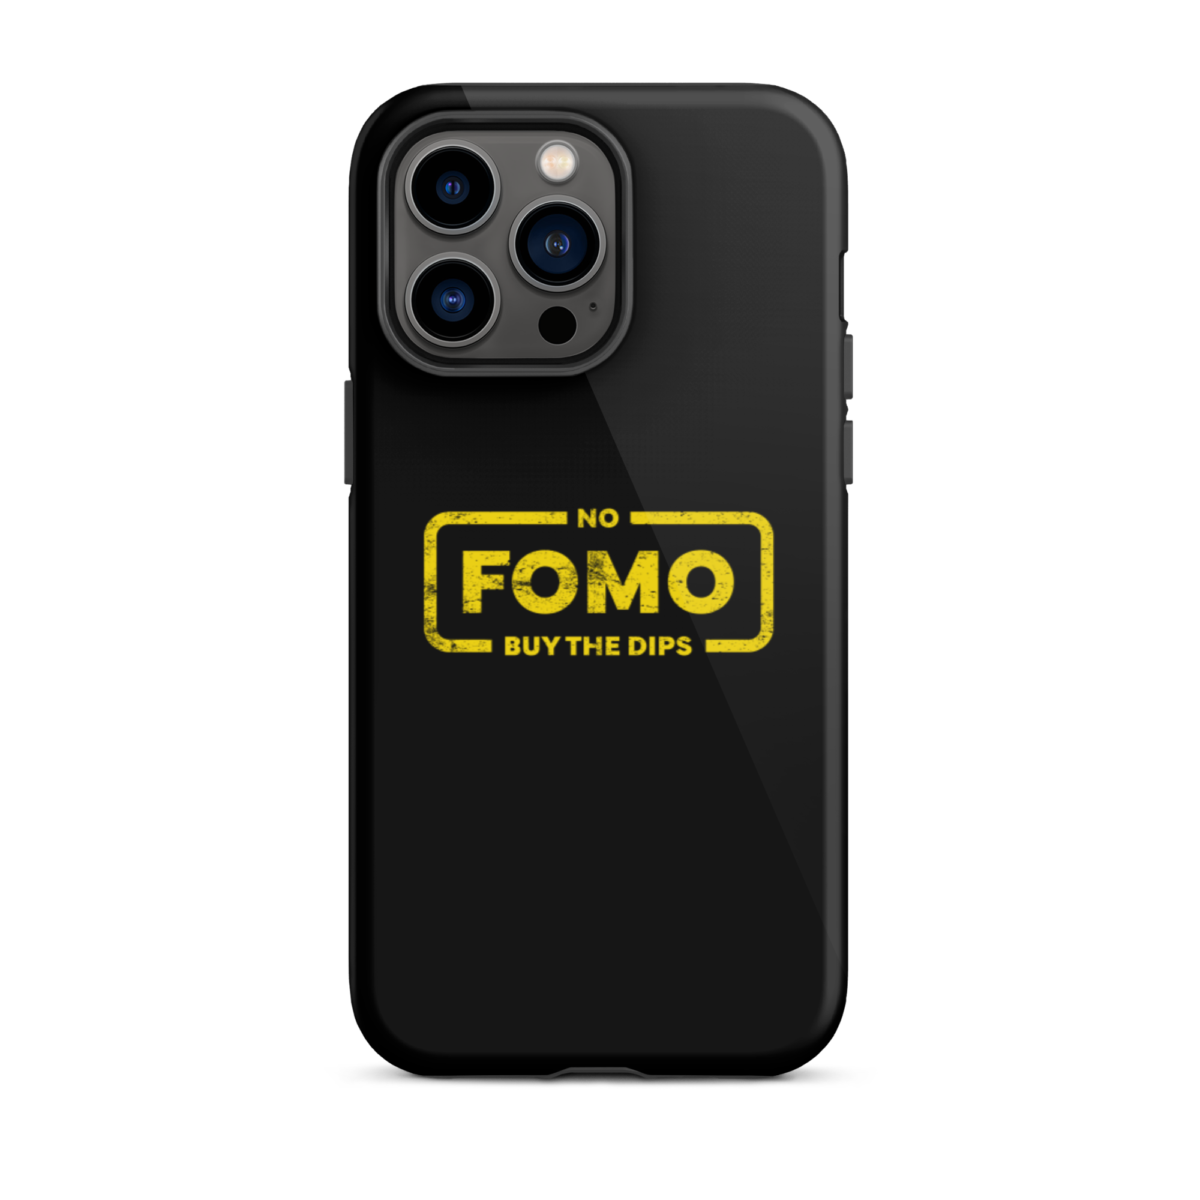 tough iphone case glossy iphone 14 pro max front 6397c093bb7a3 - NO FOMO: Buy The Dips Tough iPhone Case